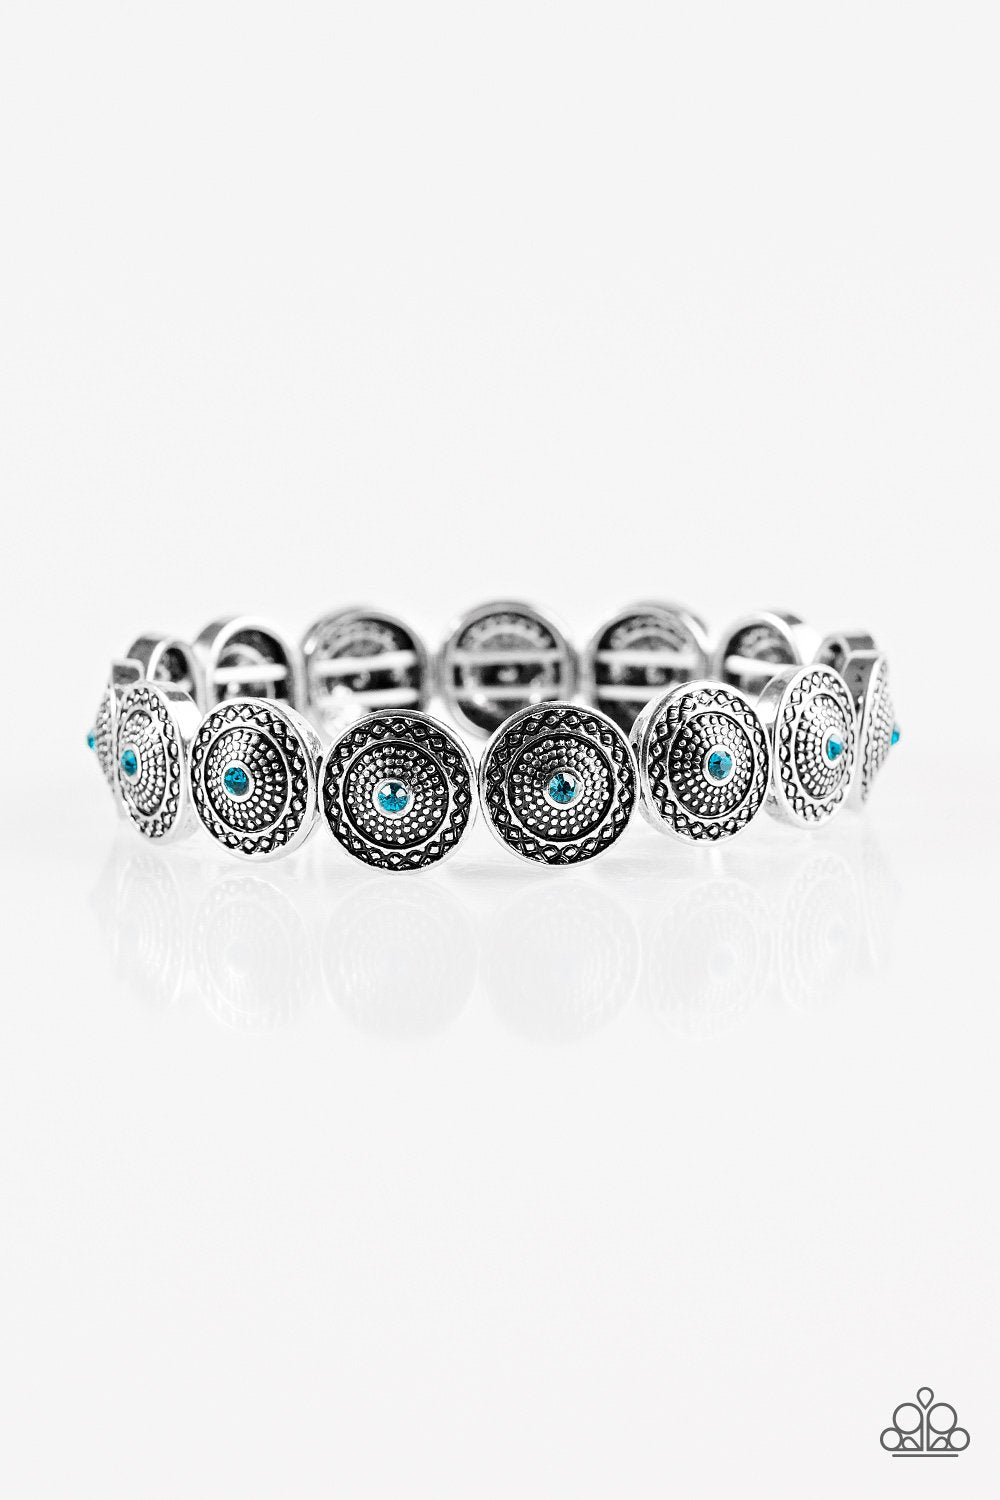 Get Your Shine On Silver and Blue Gem Bracelet - Paparazzi Accessories-CarasShop.com - $5 Jewelry by Cara Jewels